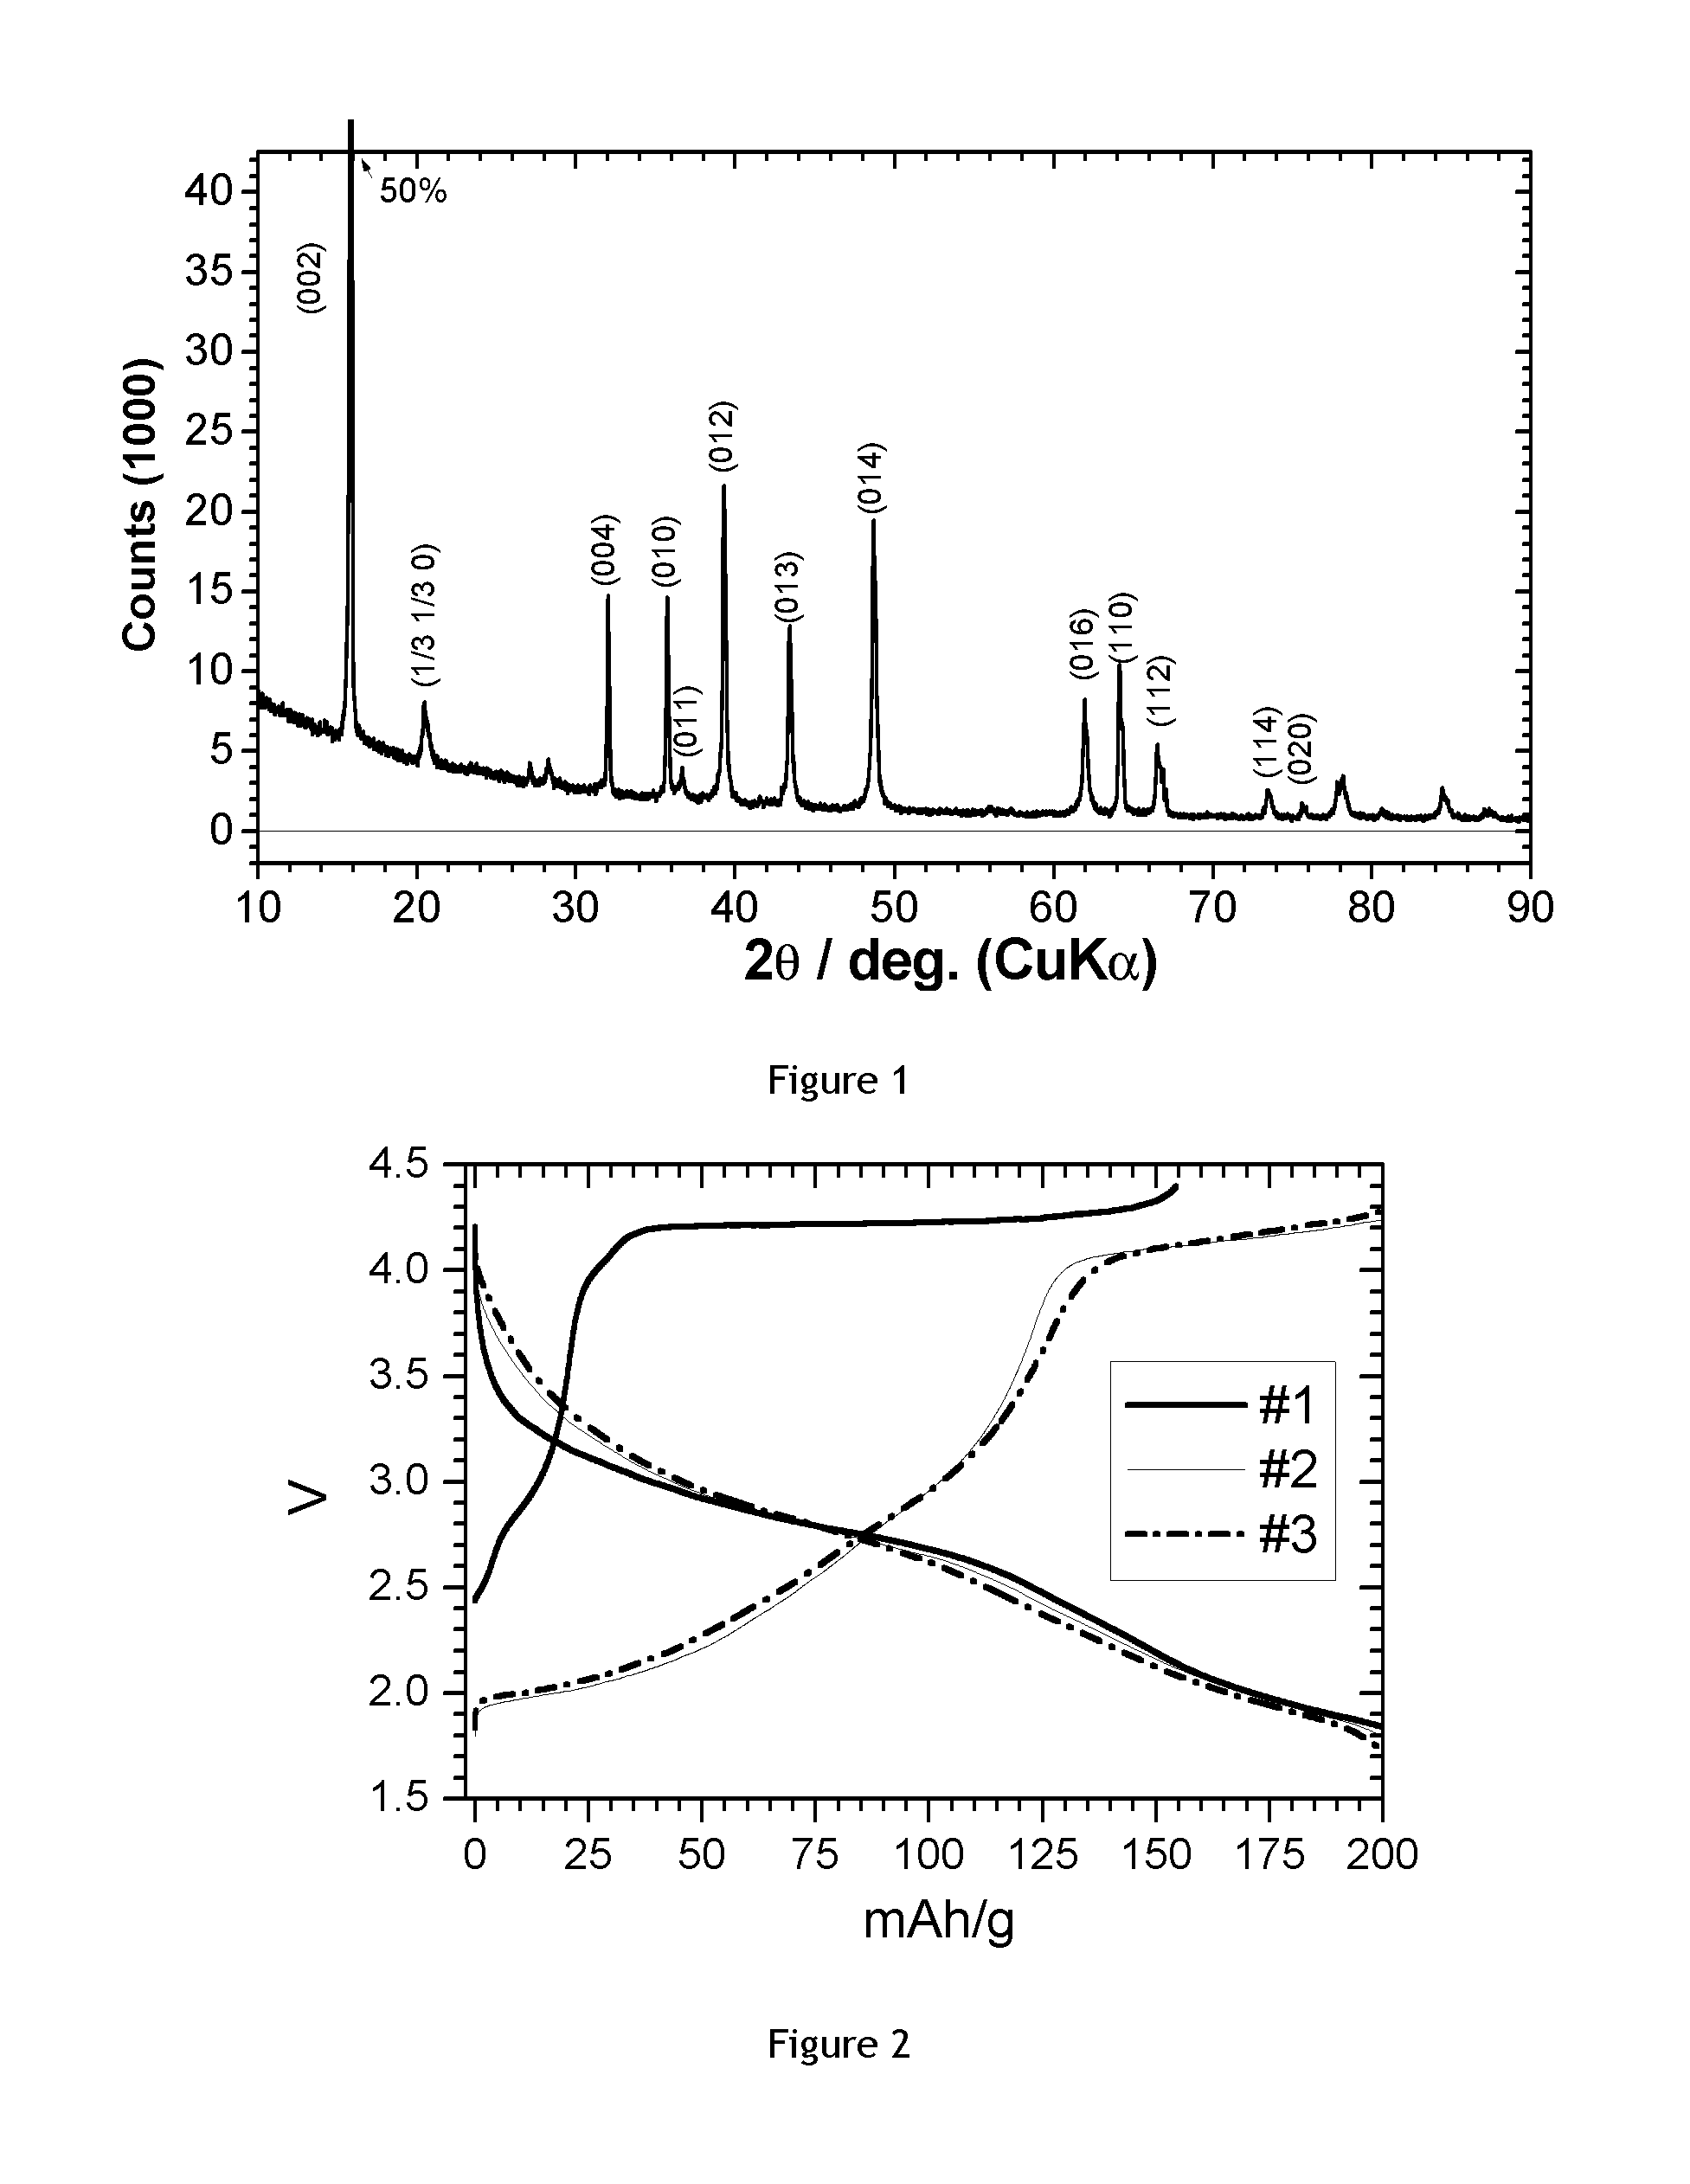 Doped Sodium Manganese Oxide Cathode Material for Sodium Ion Batteries